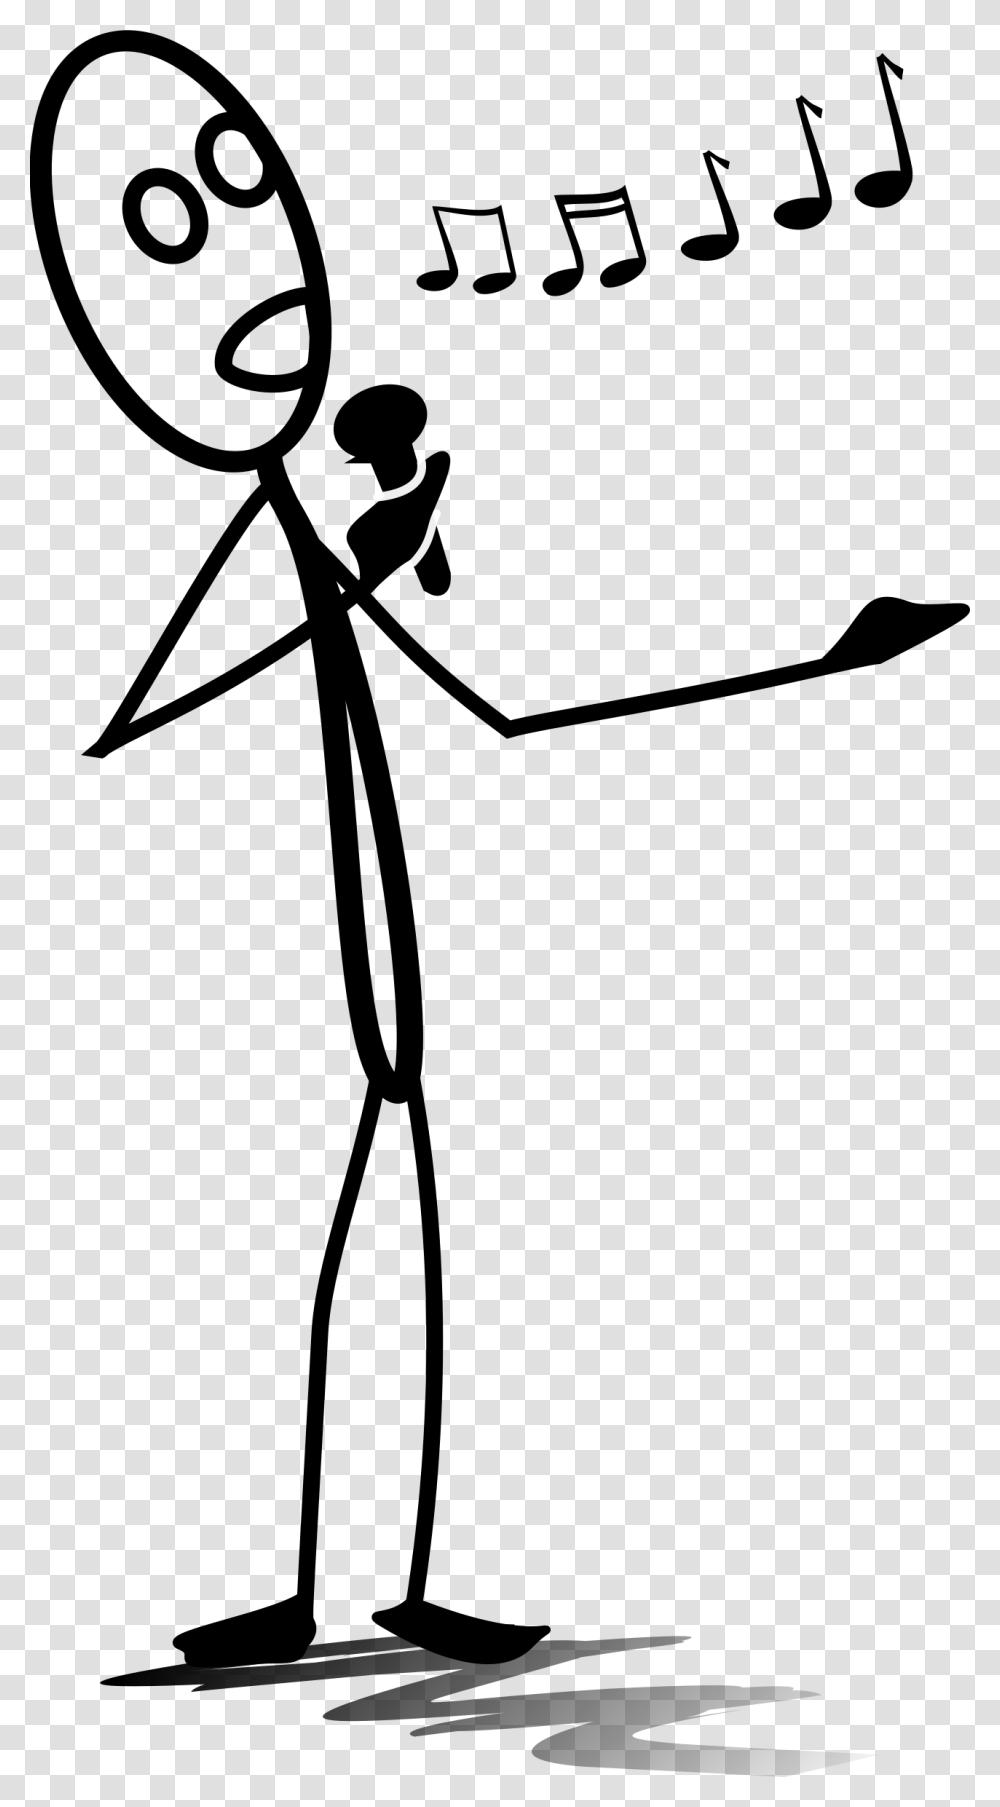 Stick Figure Stick Figure Singing, Outdoors, Nature, Astronomy, Outer Space Transparent Png